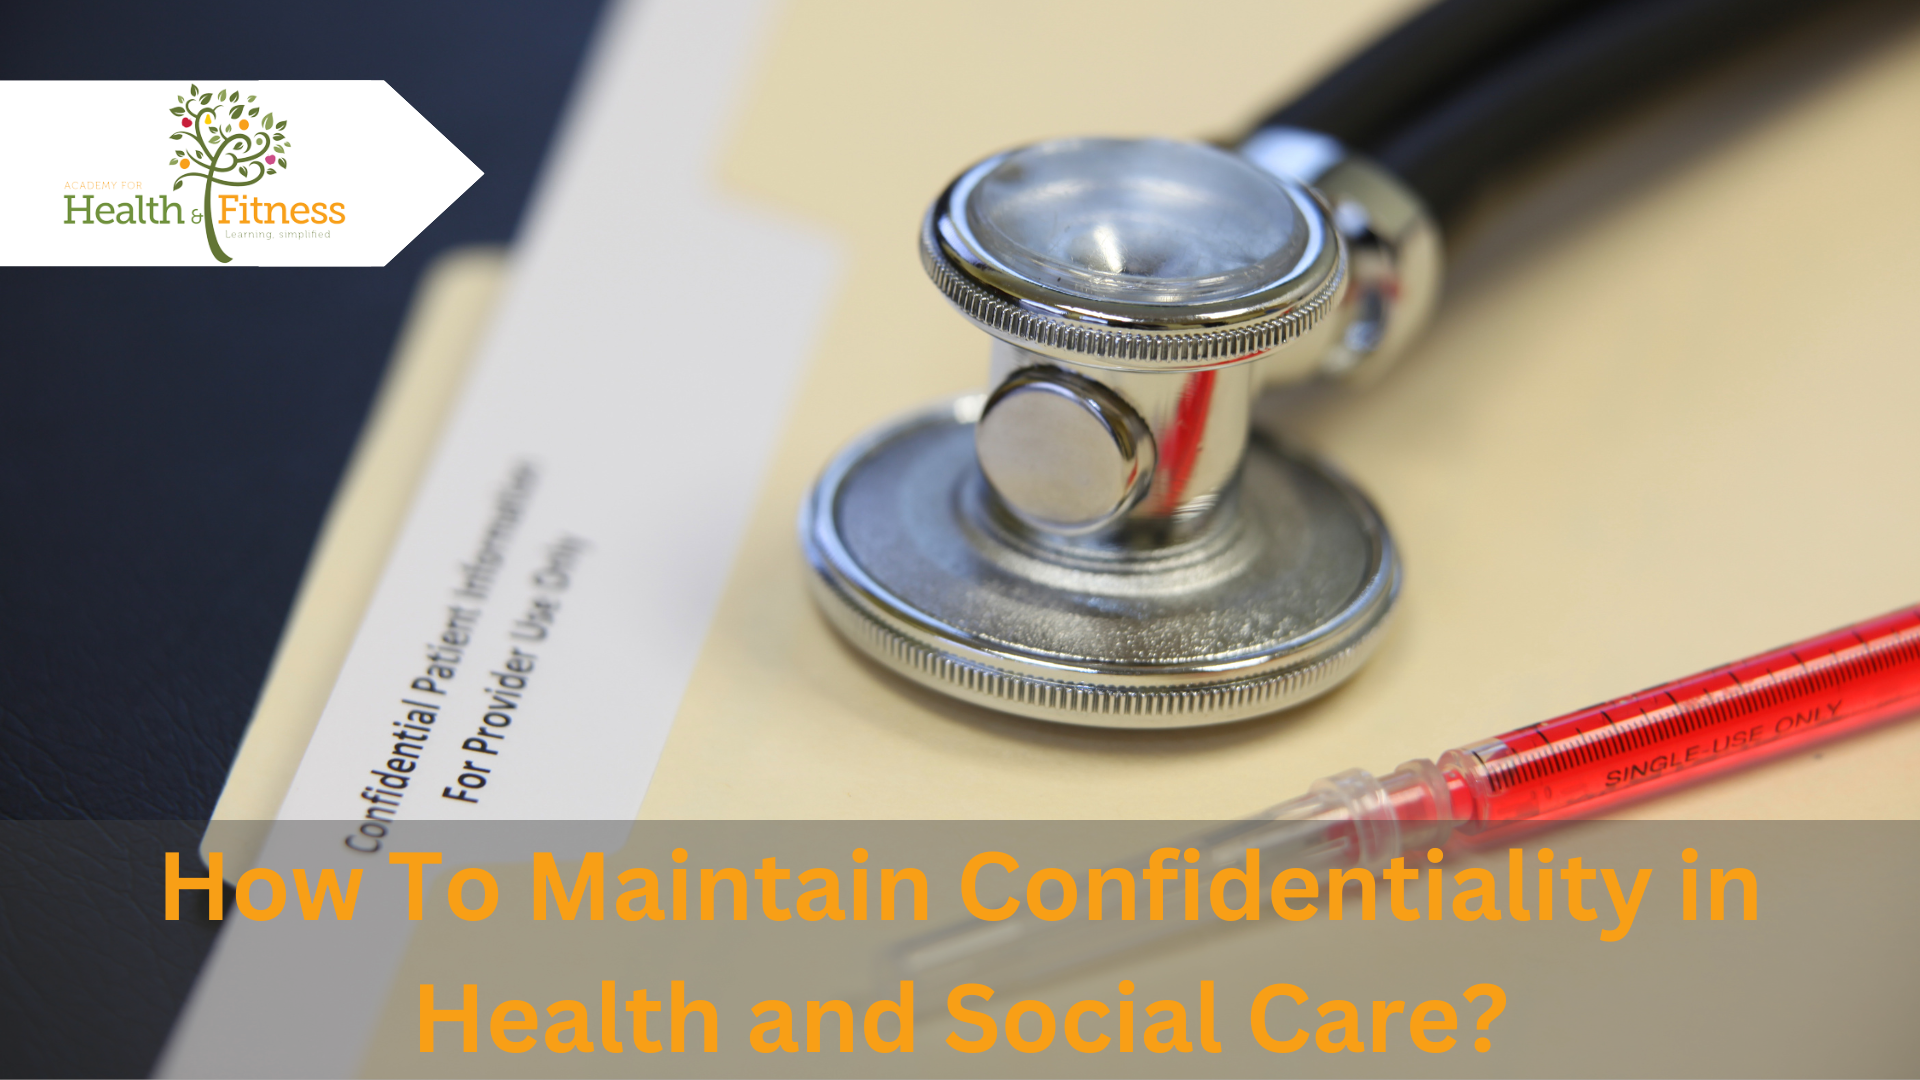 How To Maintain Confidentiality in Health and Social Care